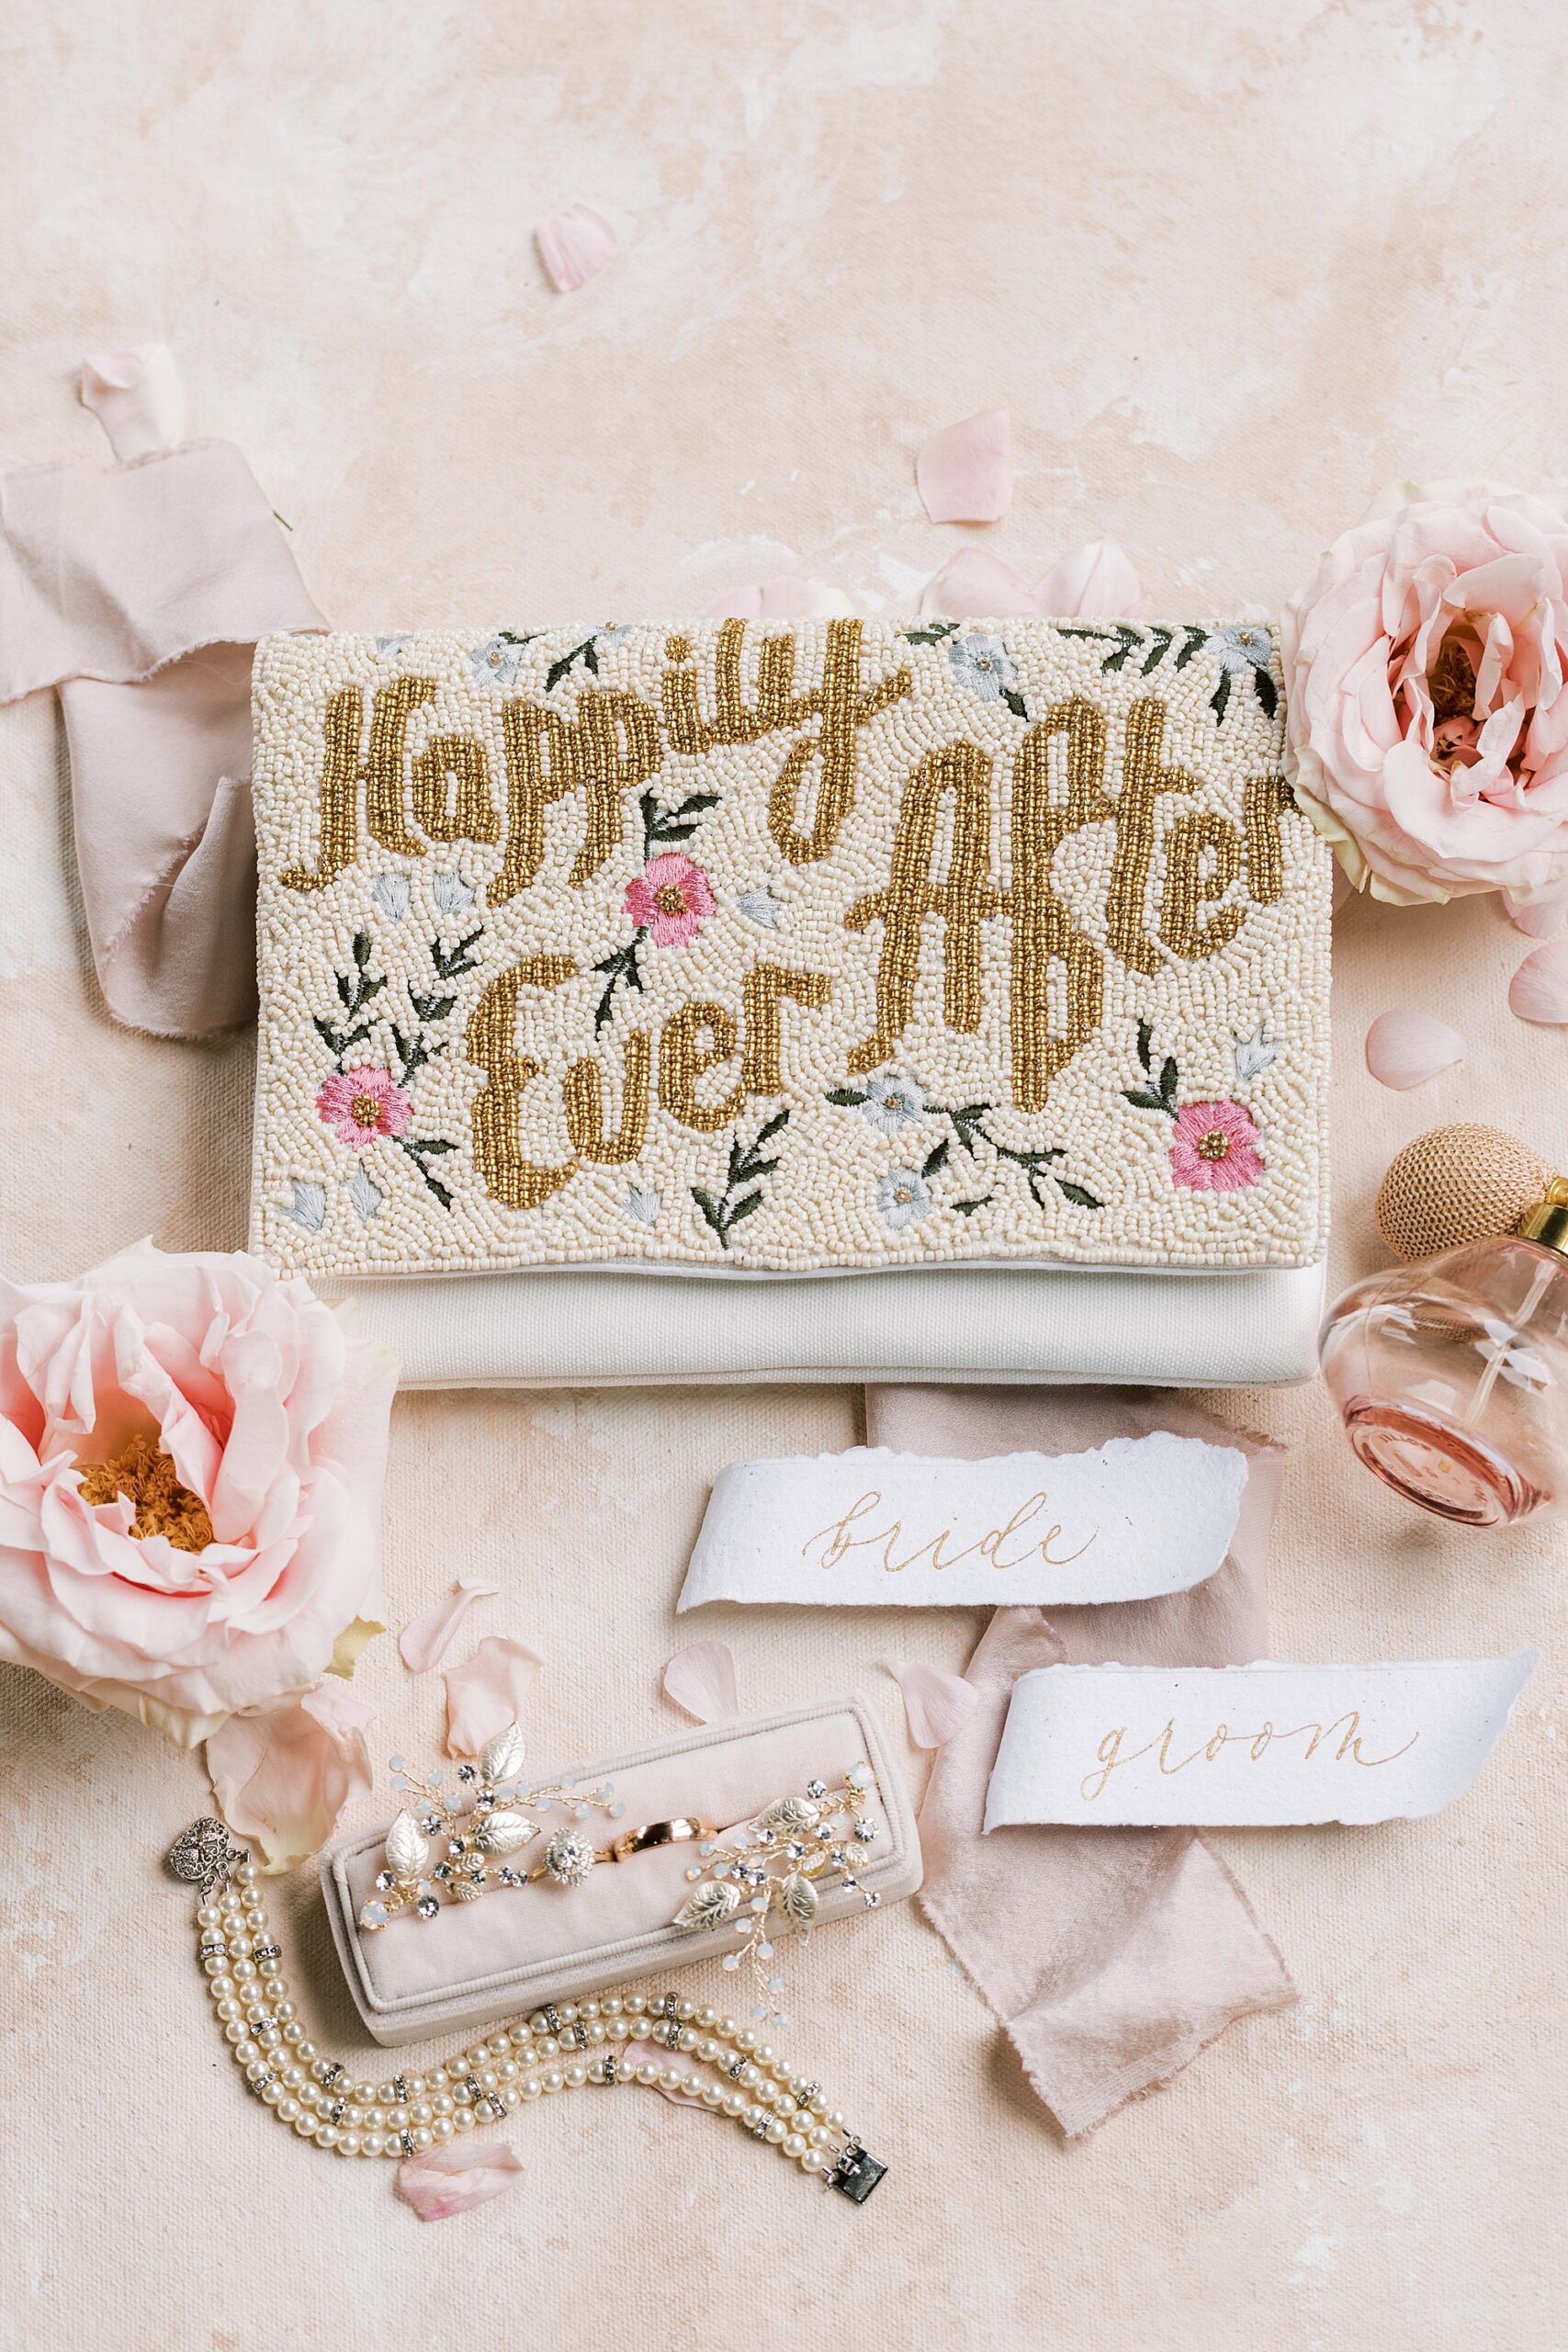 bride's clutch with custom embroidery of "happily ever after"